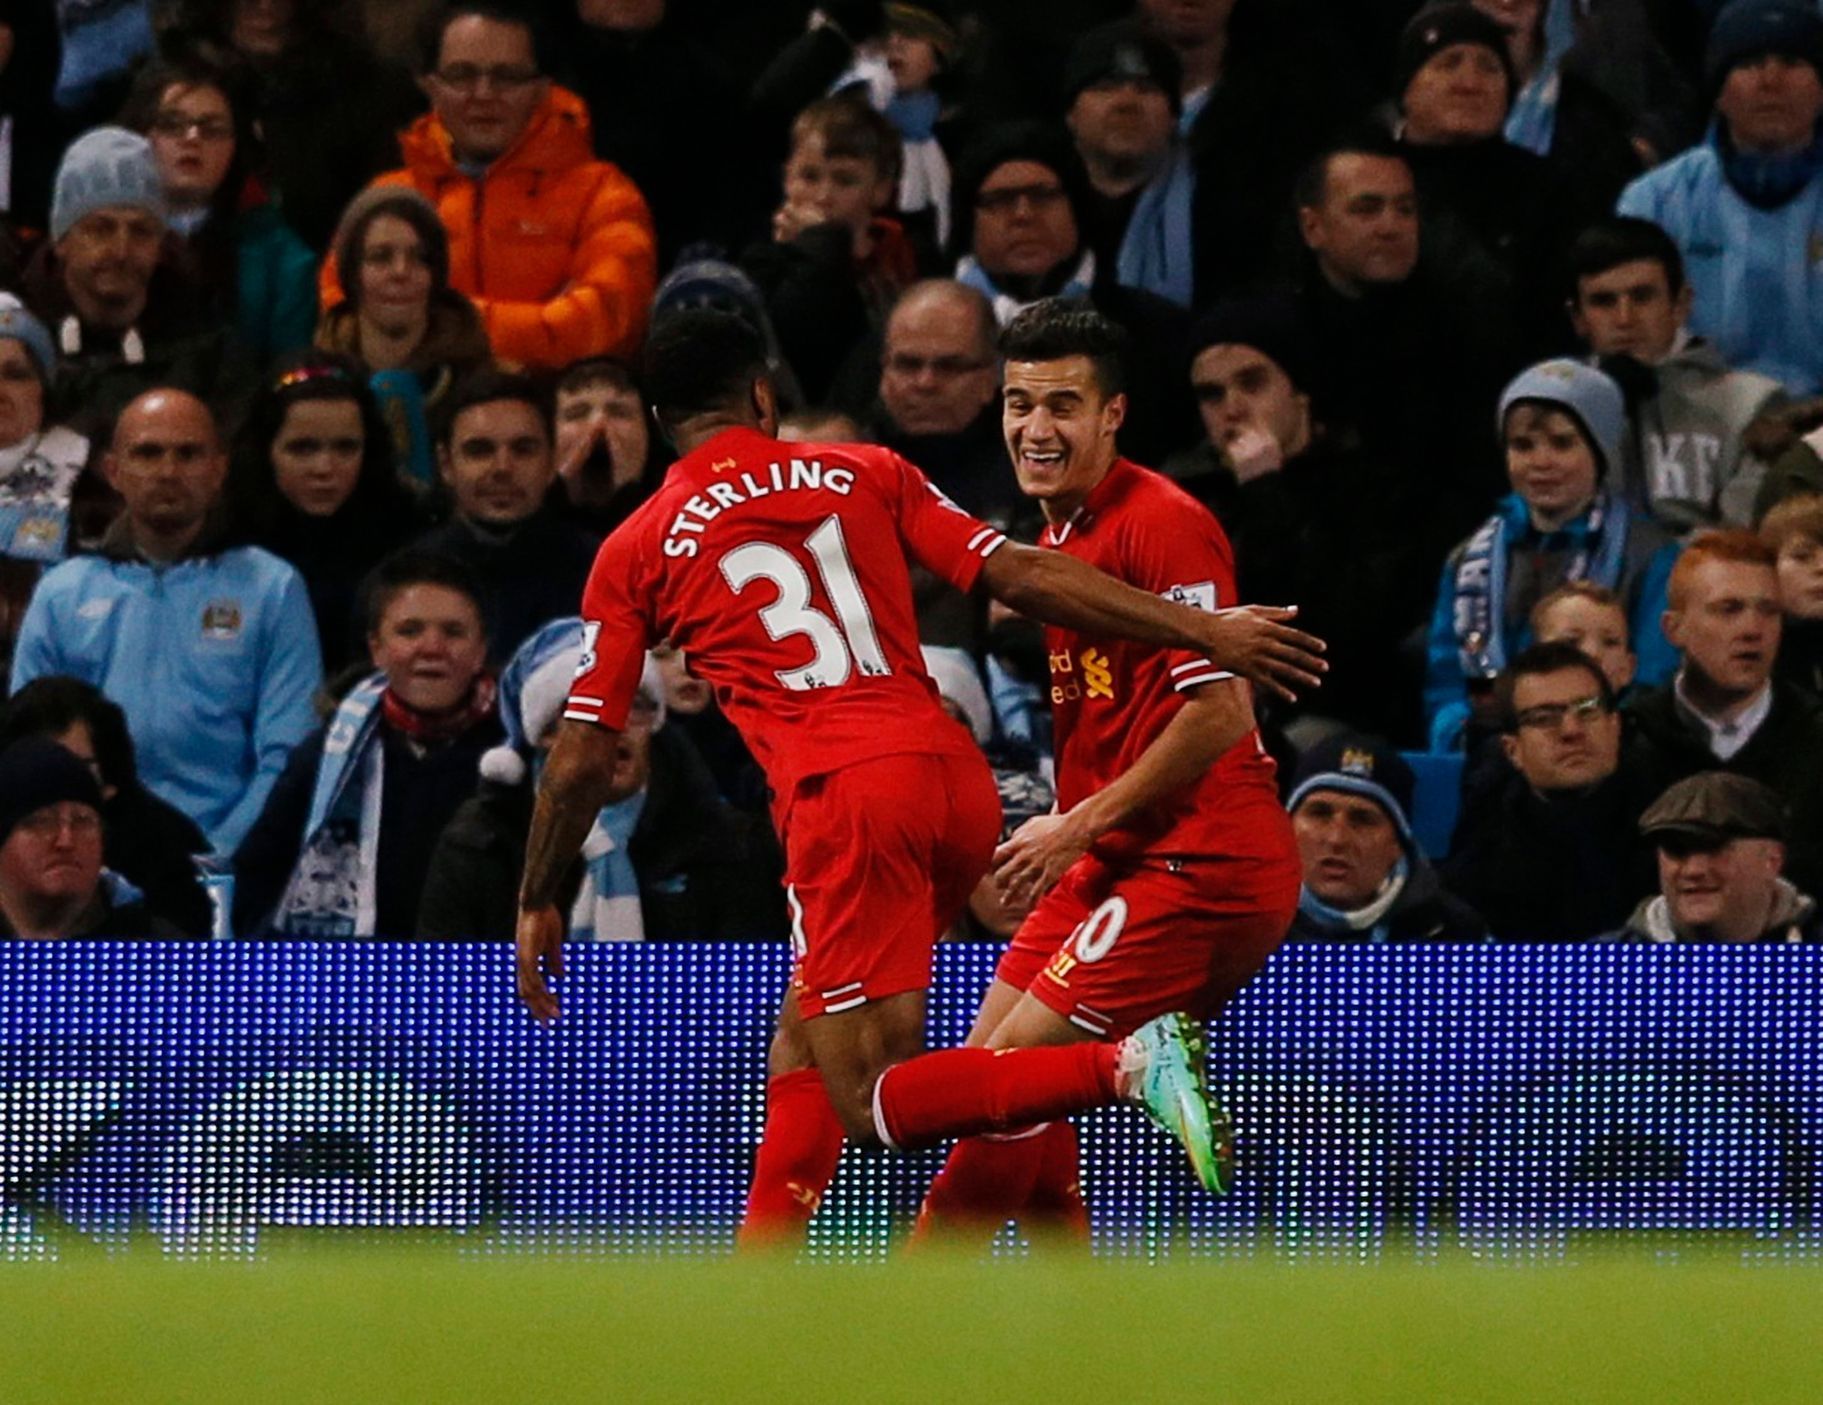 Liverpool's Coutinho celebrates with teammate Sterling after scoring a goal against Manchester City during their English Premier League soccer match in Manchester